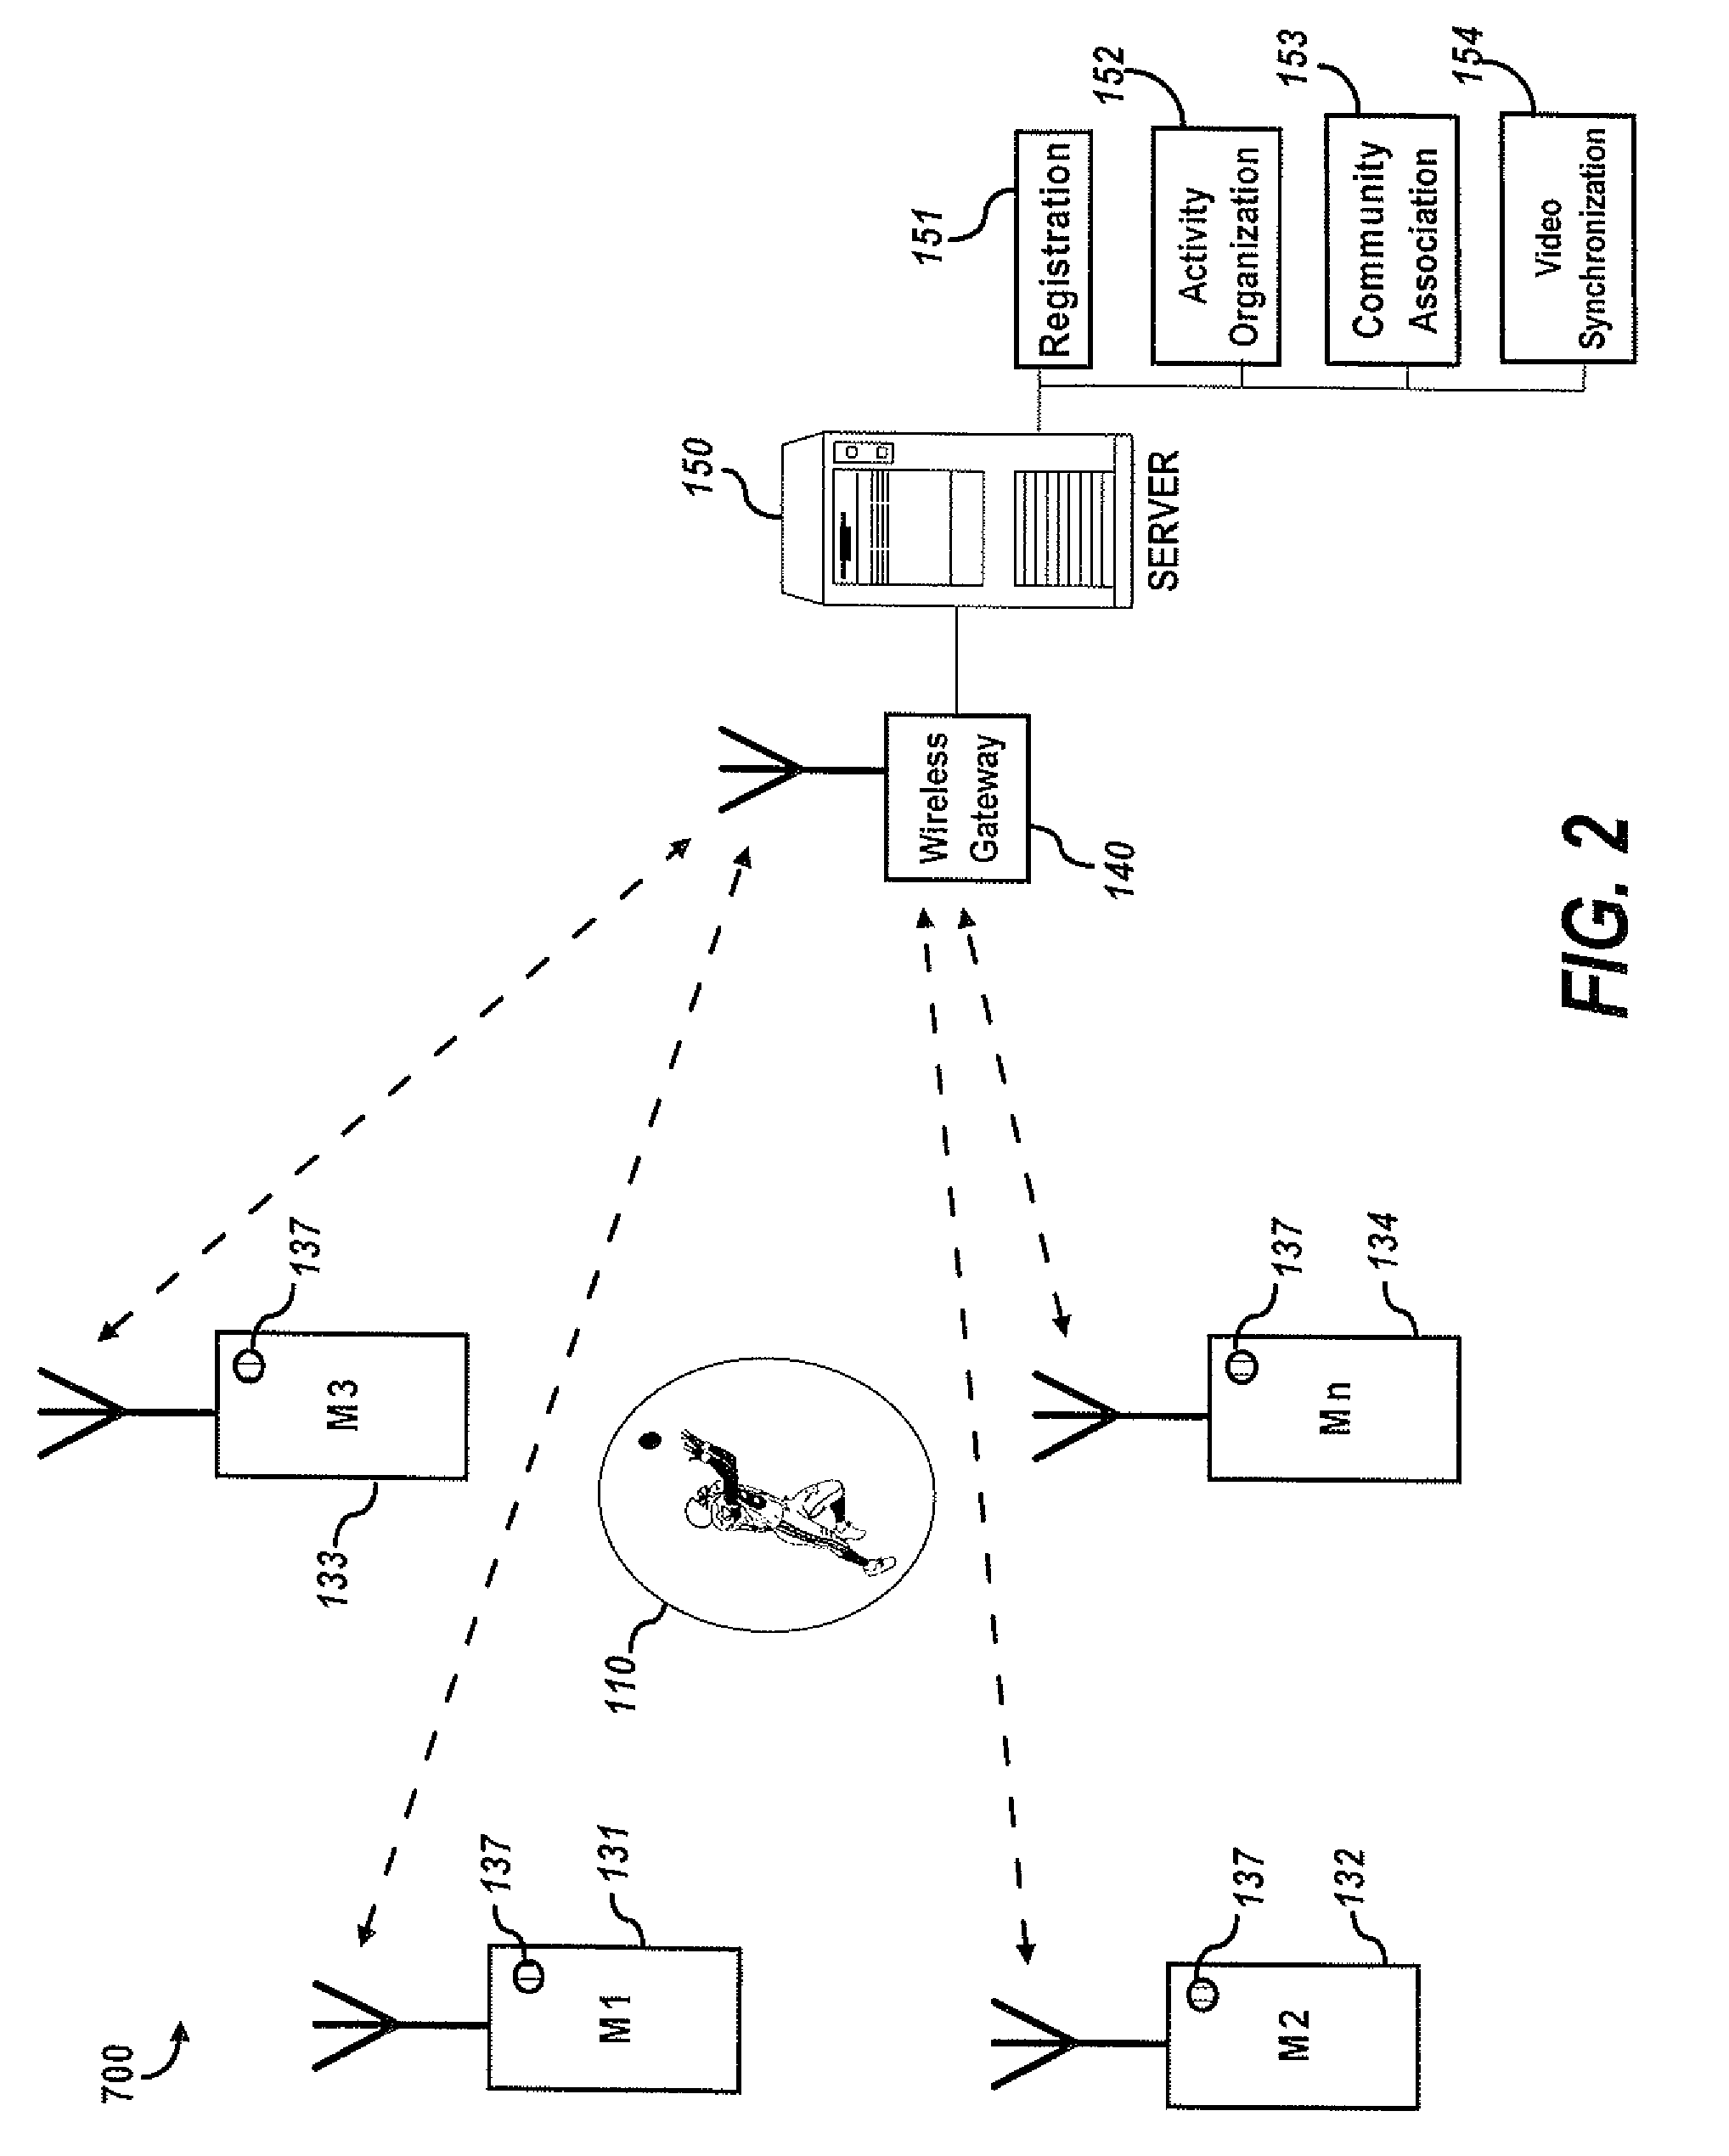 Providing multiple video perspectives of activities through a data network to a remote multimedia server for selective display by remote viewing audiences